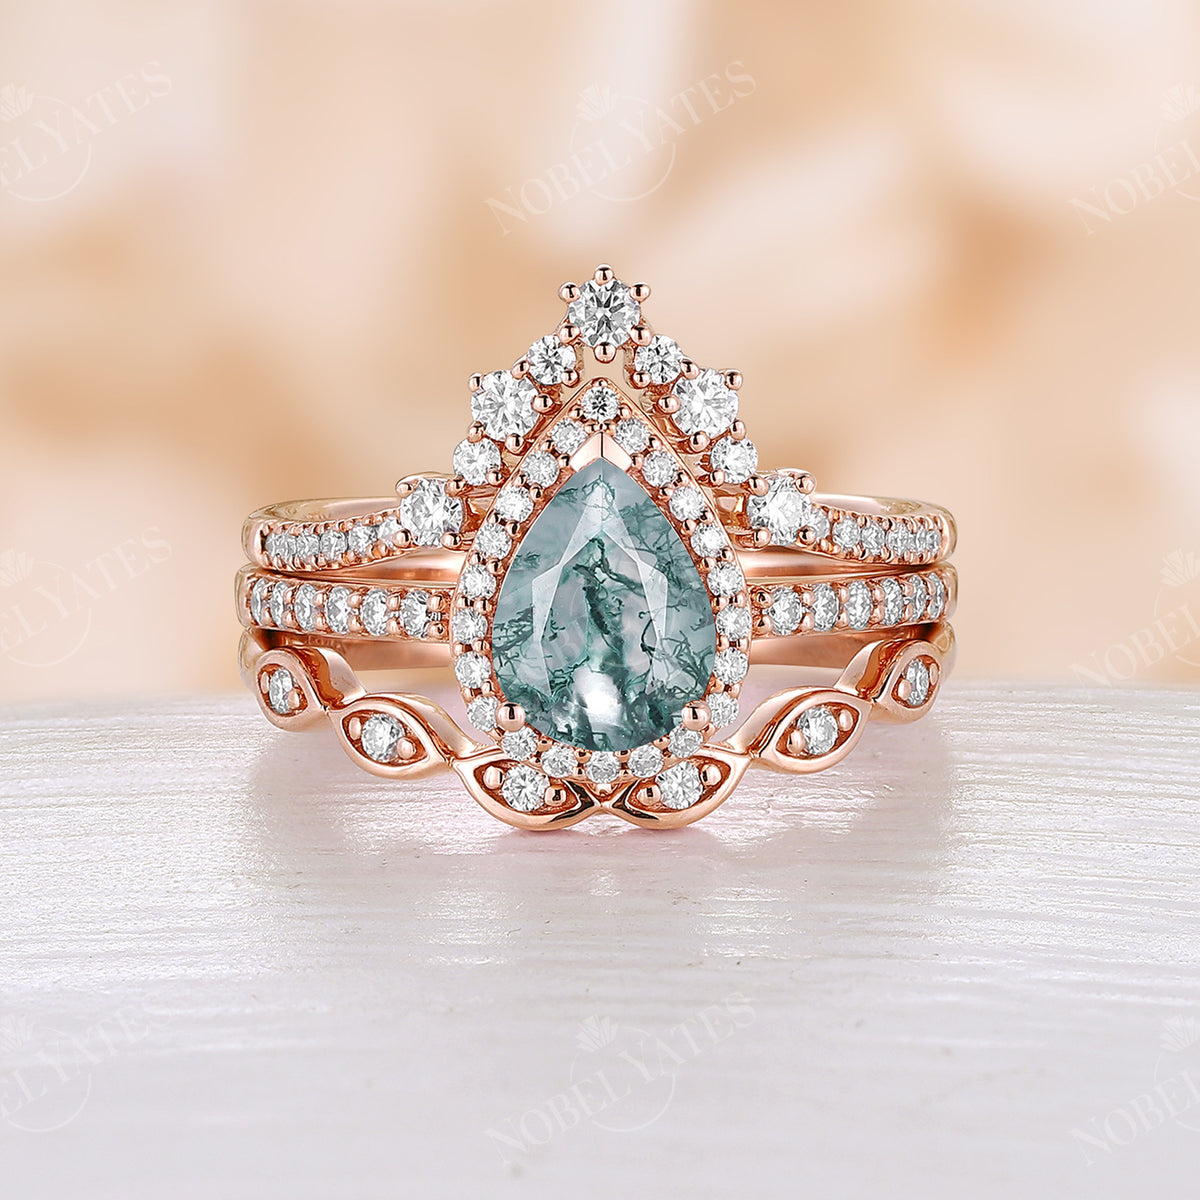 Vintage Pear Moss Agate Rose Gold Halo & Pave Engagement Ring Set